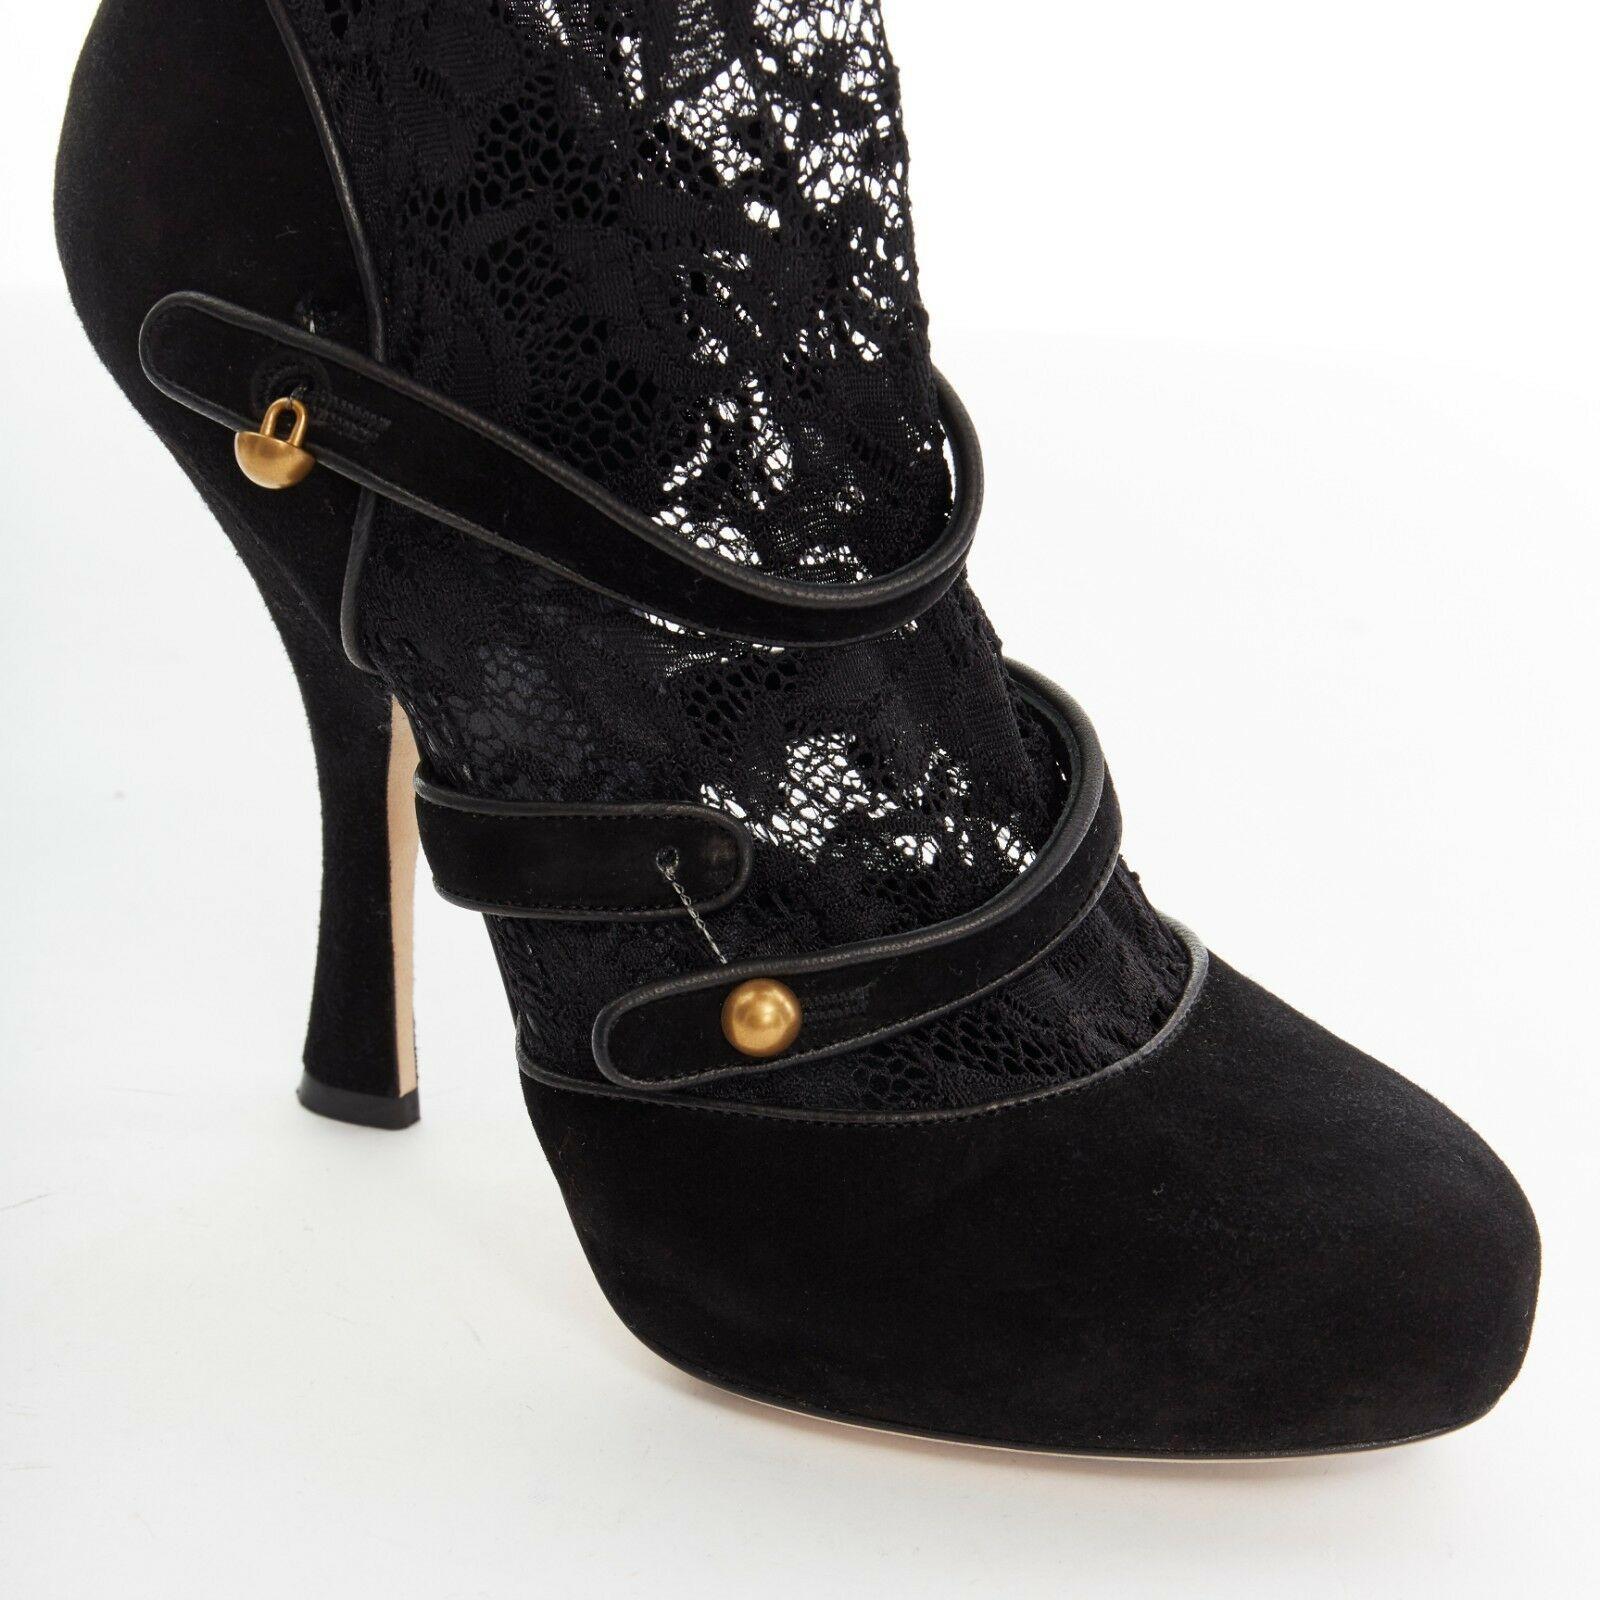 DOLCE GABBANA black suede leather floral lace sock strappy high heel EU38 US8 3